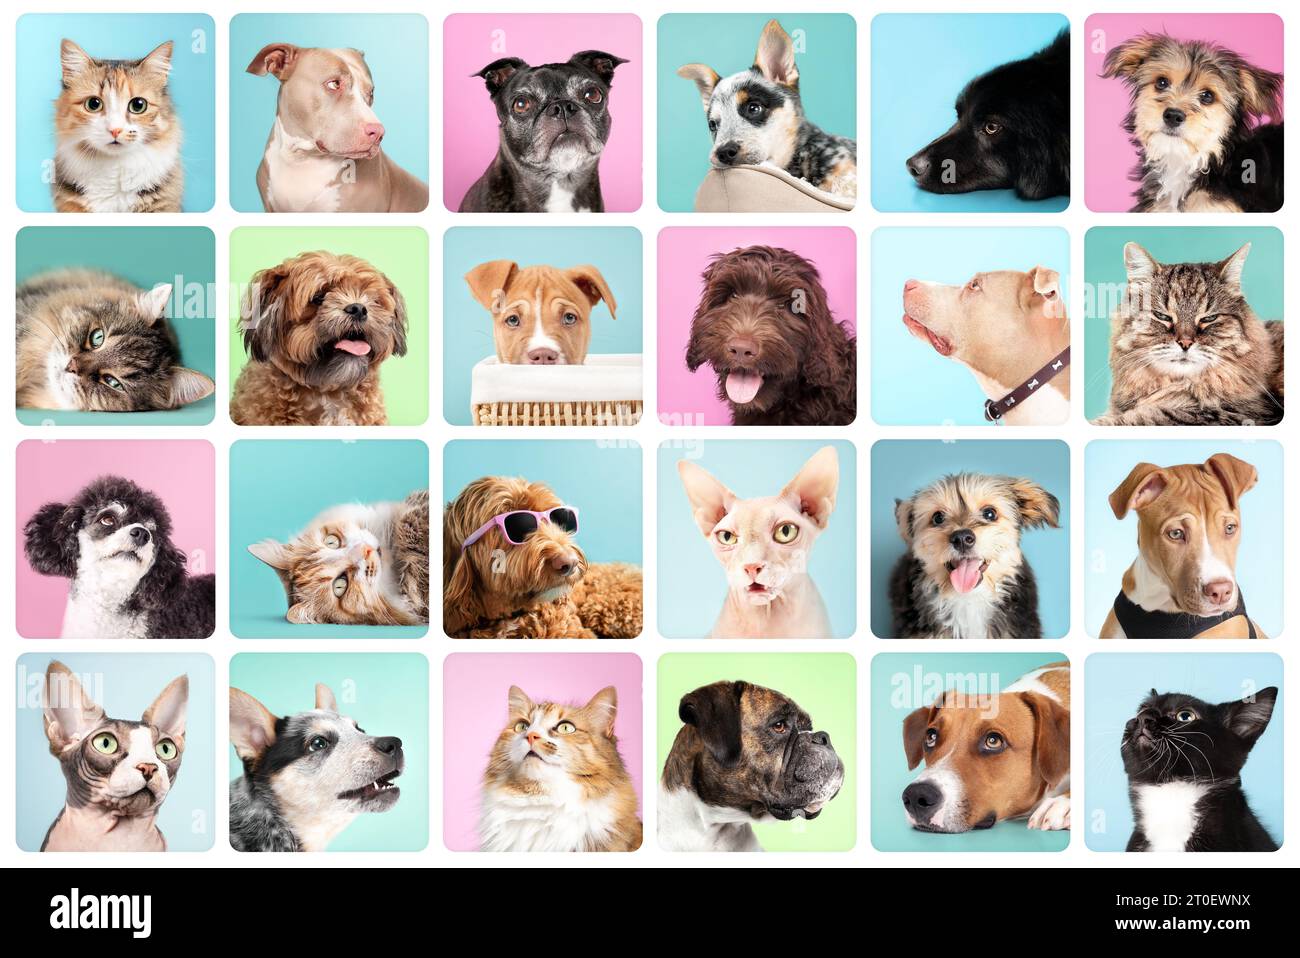 Cat and dog portrait collection with color backgrounds. Cute set of pet head shots. Labradoodle, Boxer, Poodle, Morkie, Shichon, Pitbull, Harrier and Stock Photo